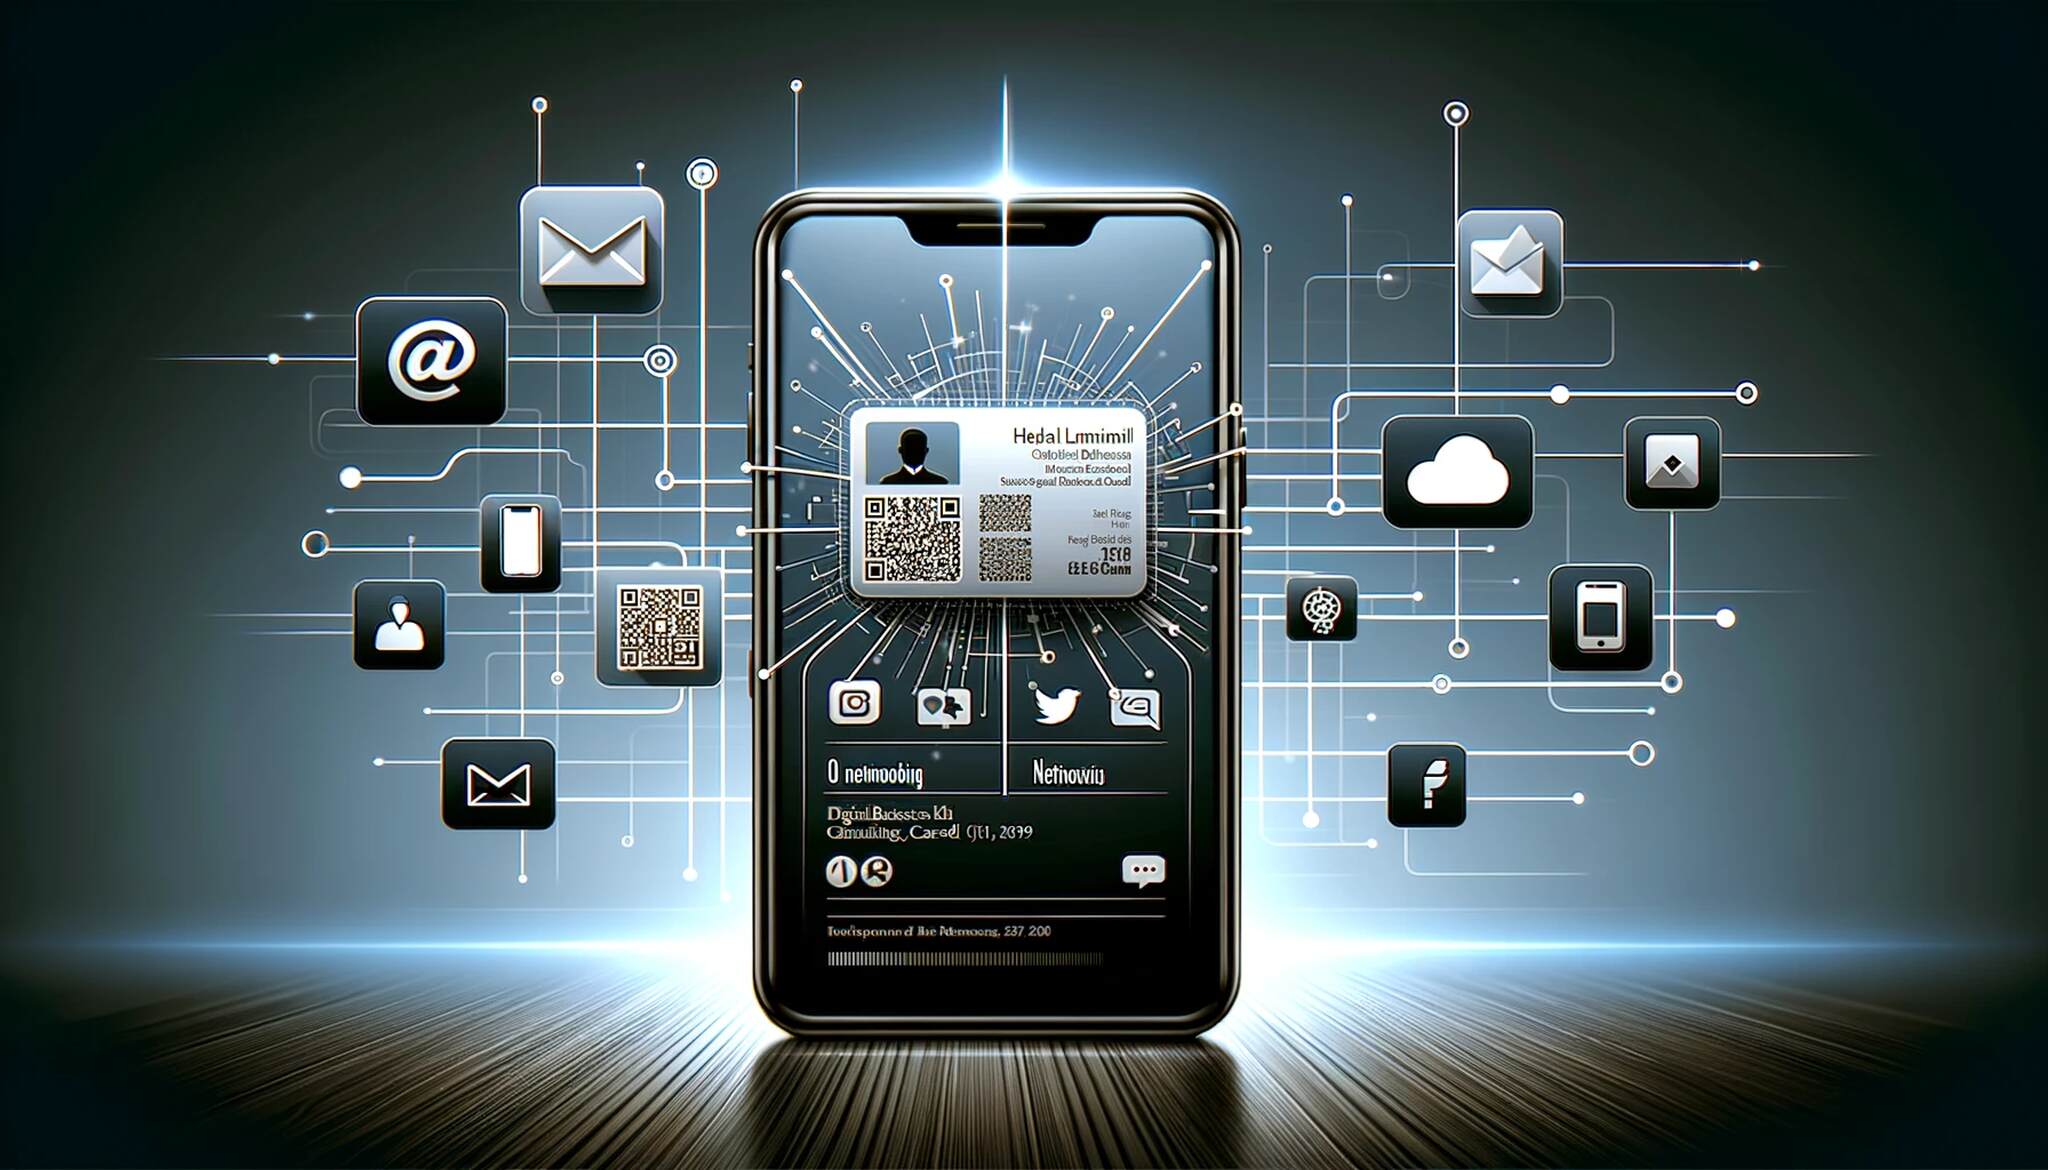 An illustration of a phone displaying a digital business card with a QR code and various icons around it